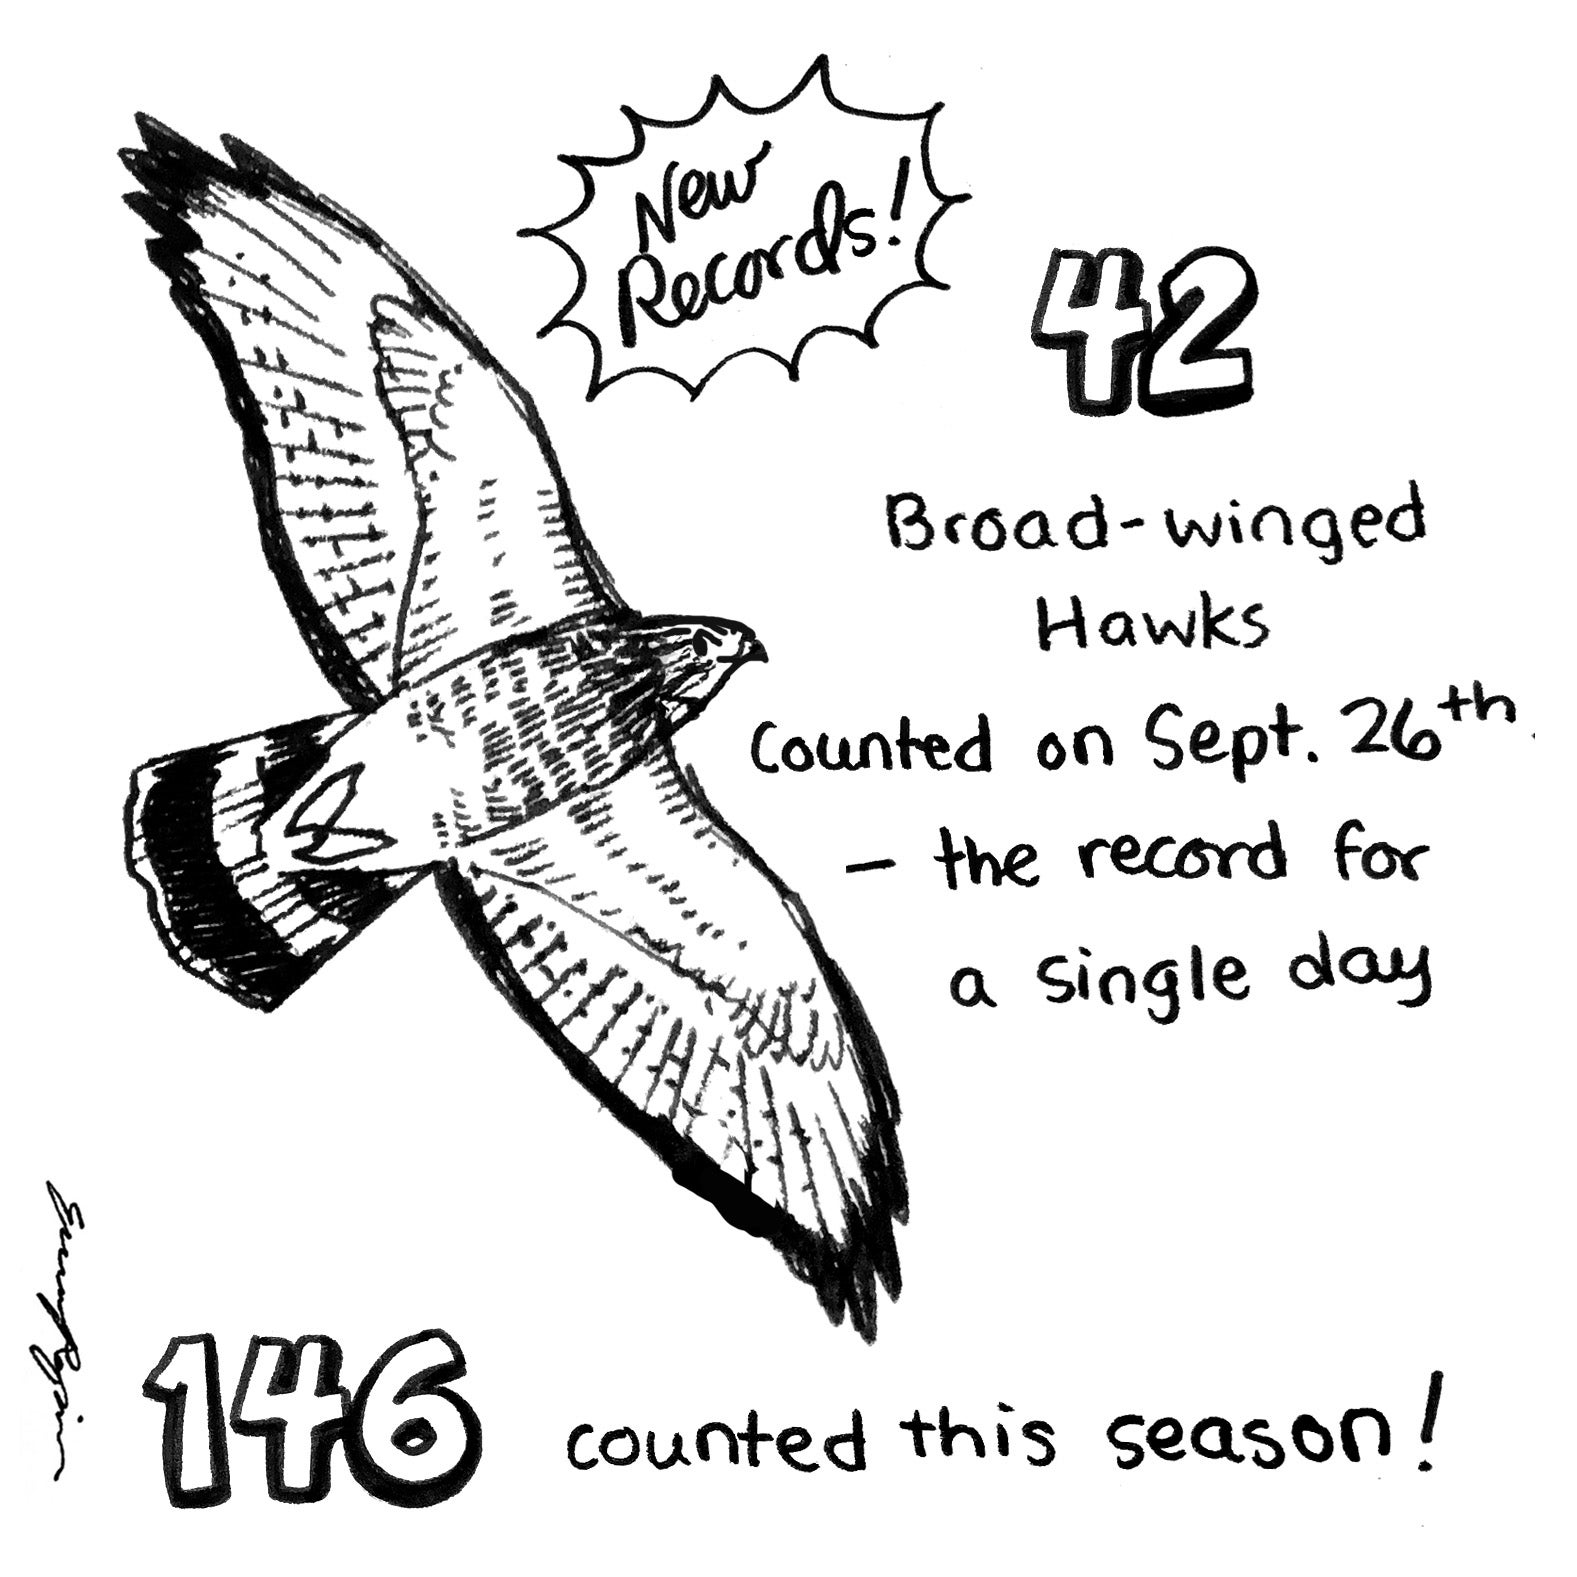 a hand-drawn sketch of a broad-winged hawk. Text around the sketch says "new record!!" with a cartoon-style explosion around it. Writing says "42 broad-winged hawks counted september 26th. the record for a single day. 146 counted this season!"